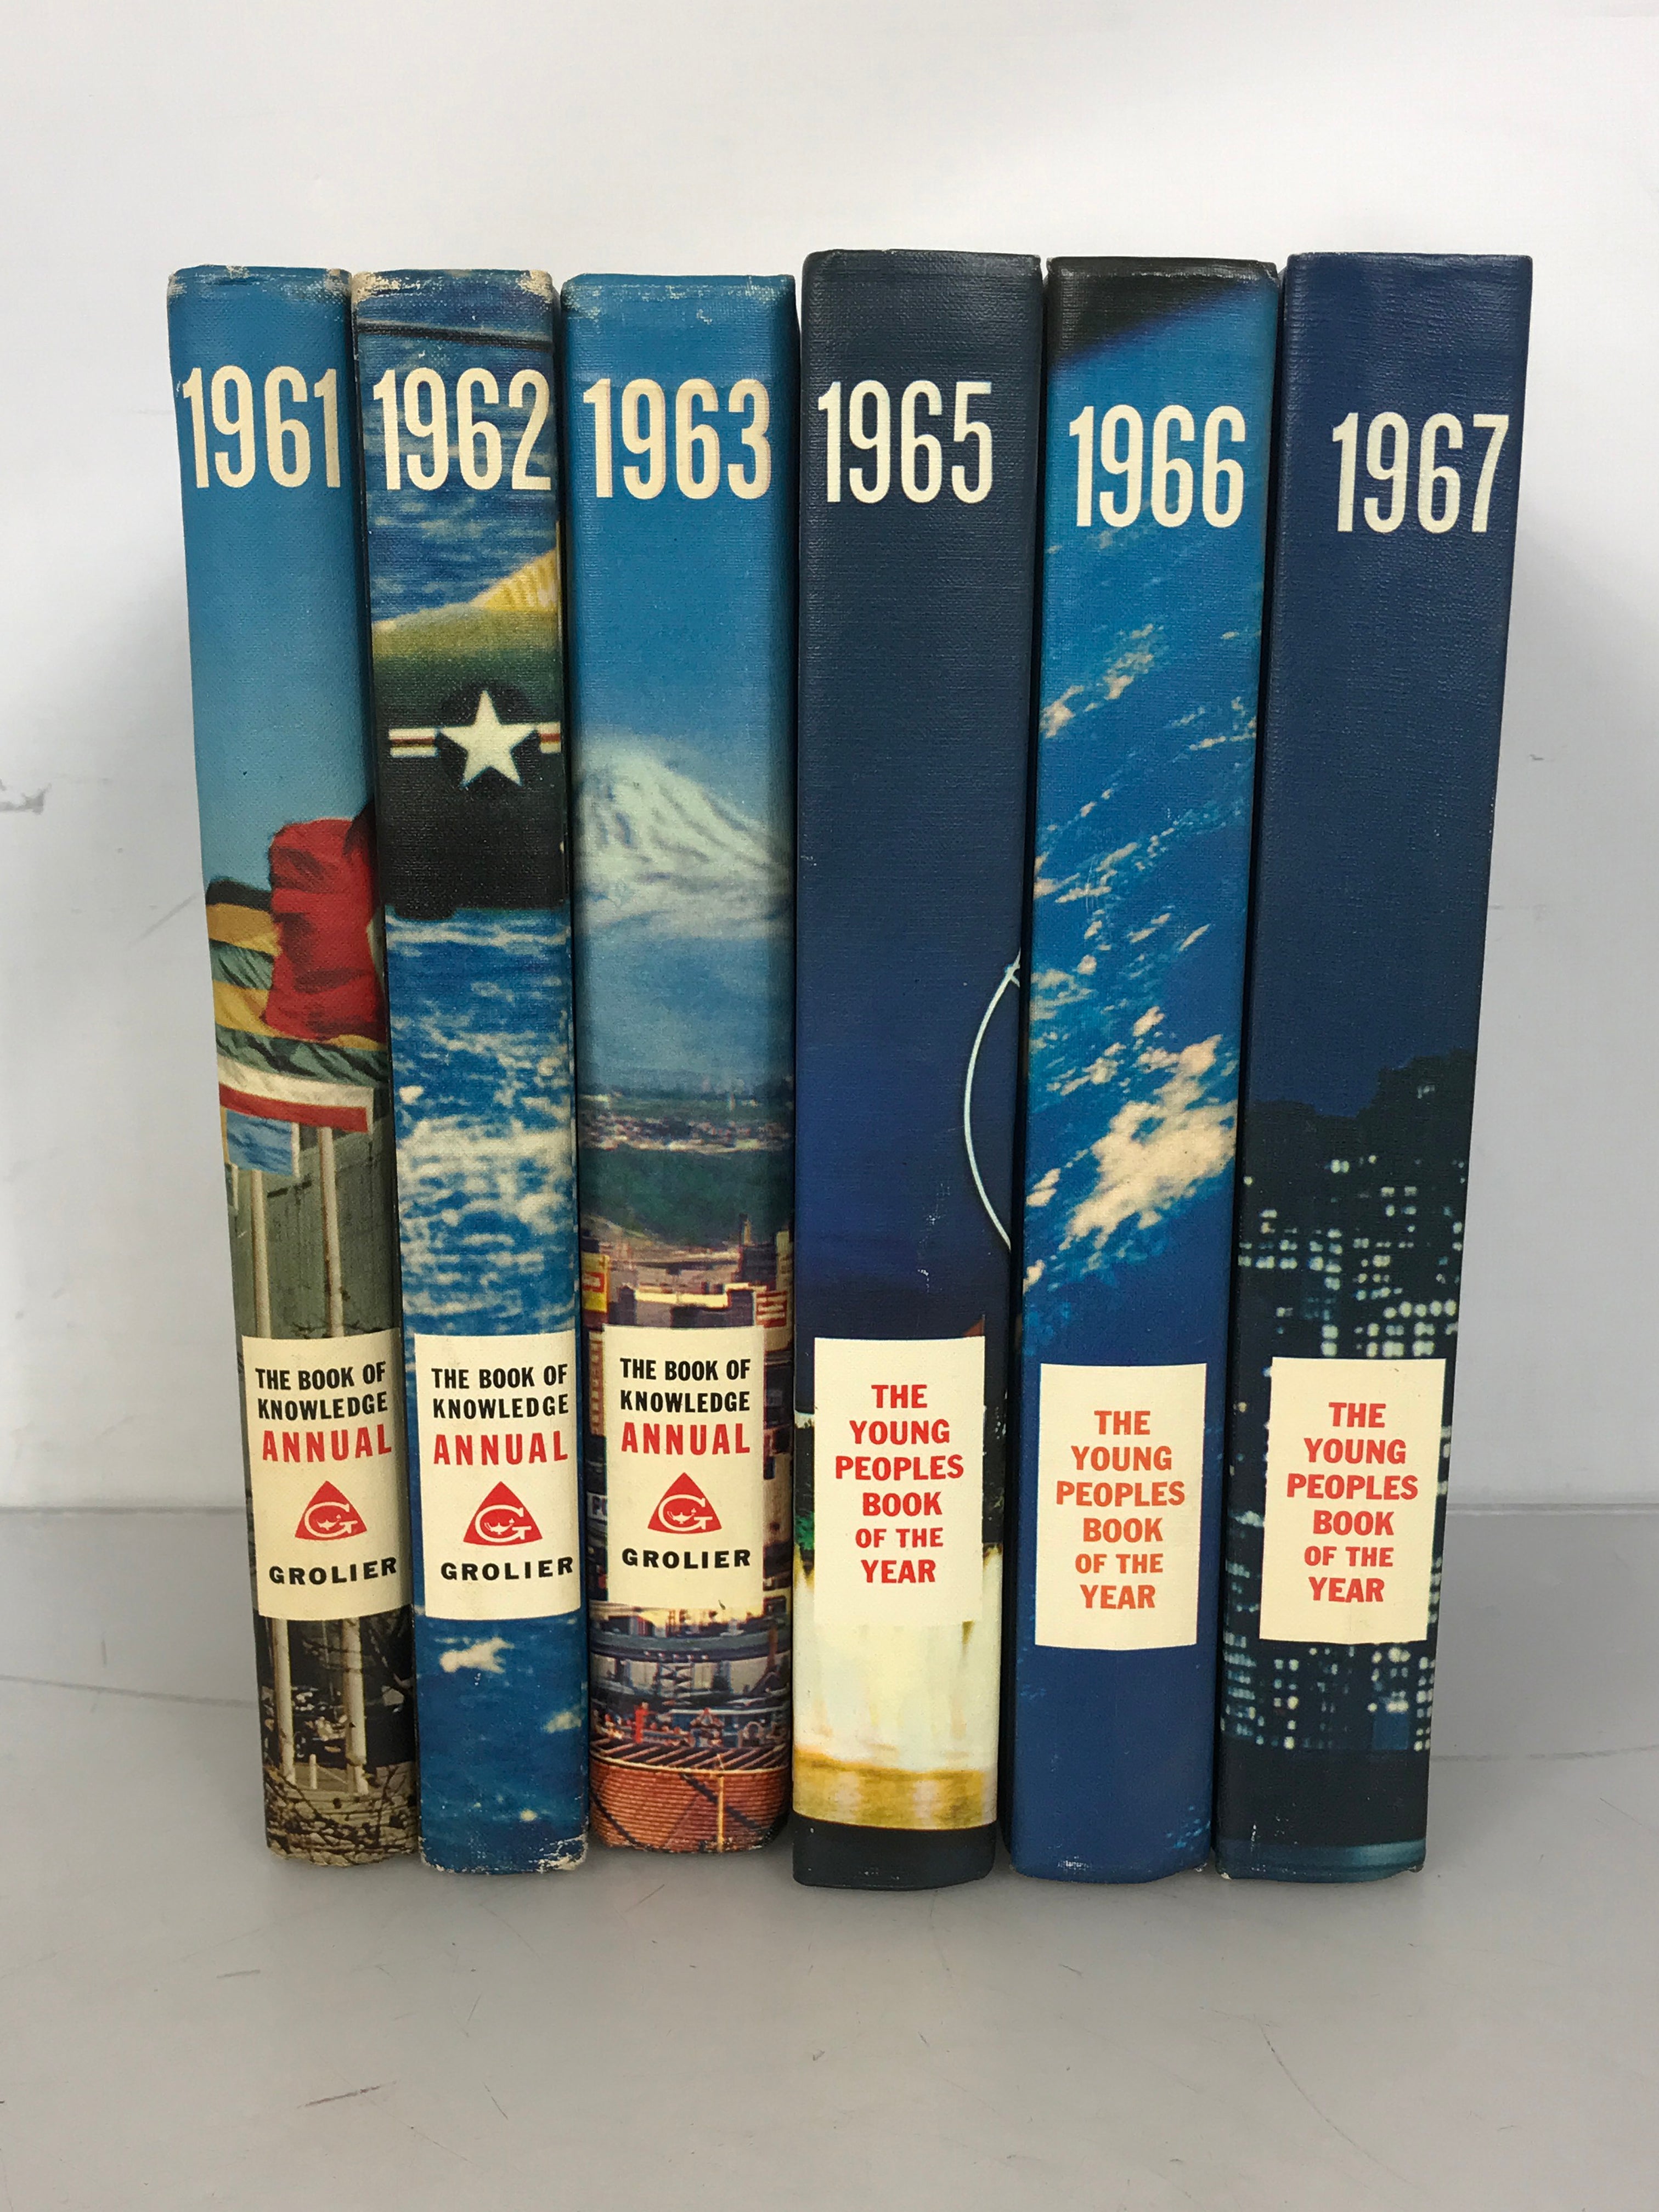 Lot of 6 Grolier The Book of Knowledge Annual (1961-1963) and The Young Peoples Book of the Year (1965-1967) HC